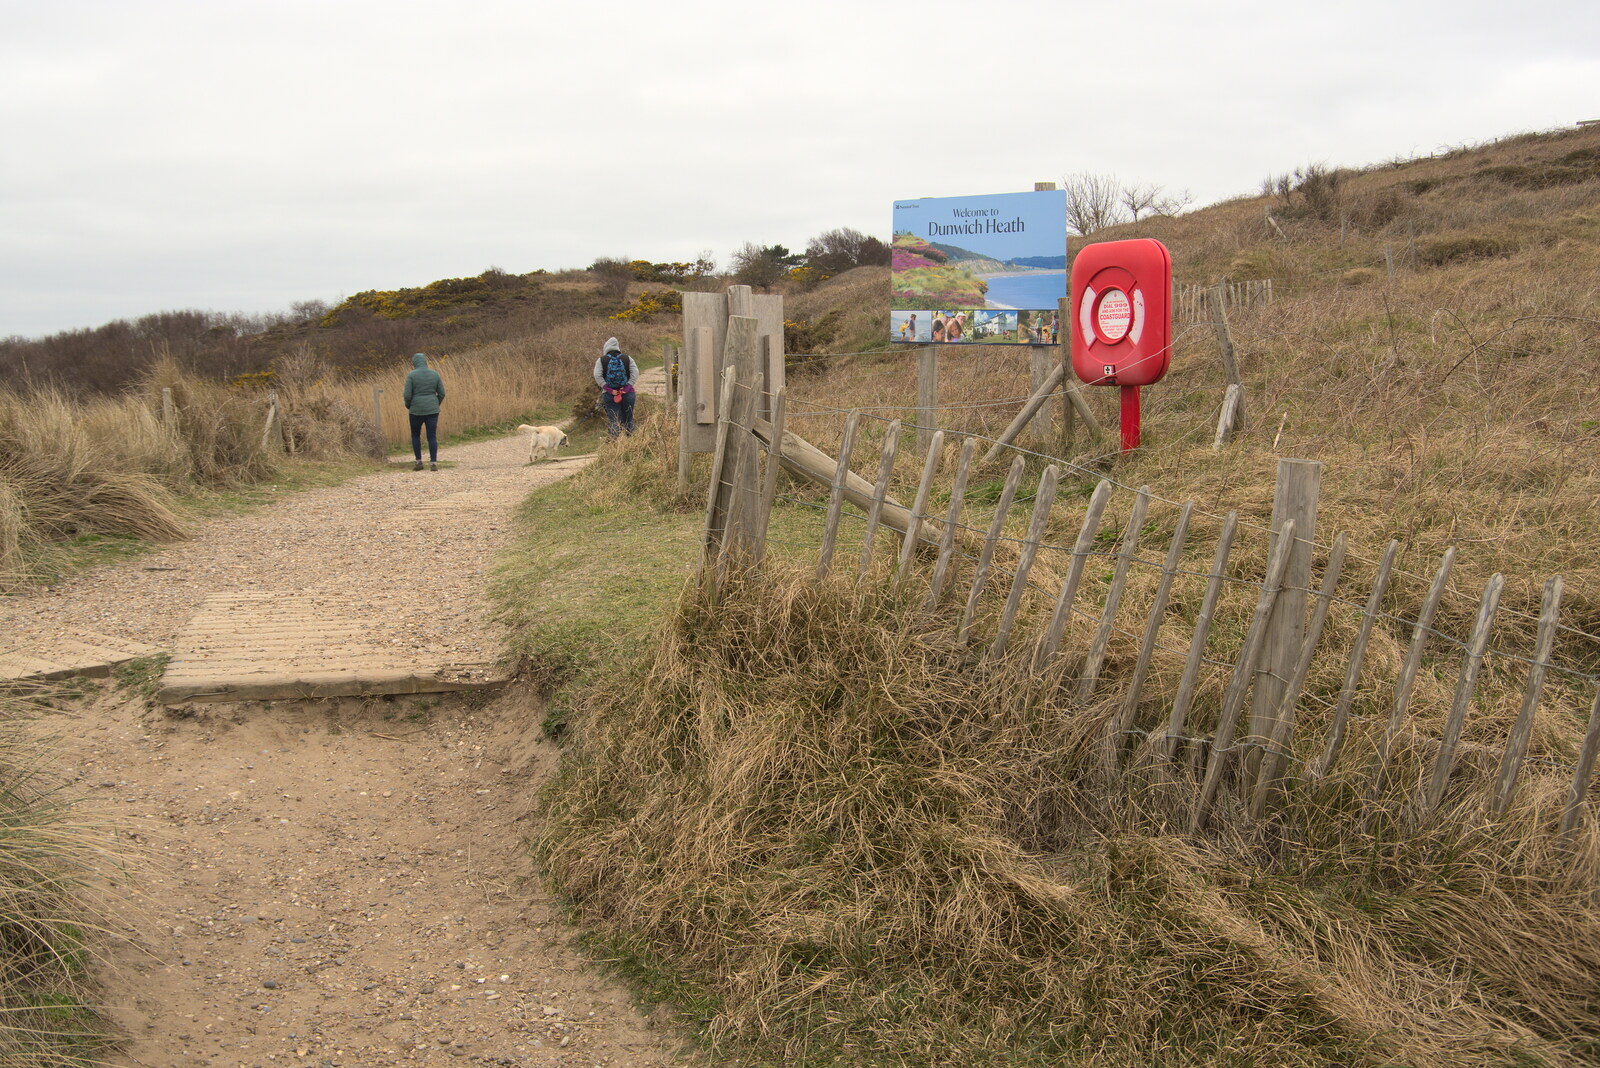 Back on the path to the car park from A Trip to Dunwich Beach, Dunwich, Suffolk - 2nd April 2021